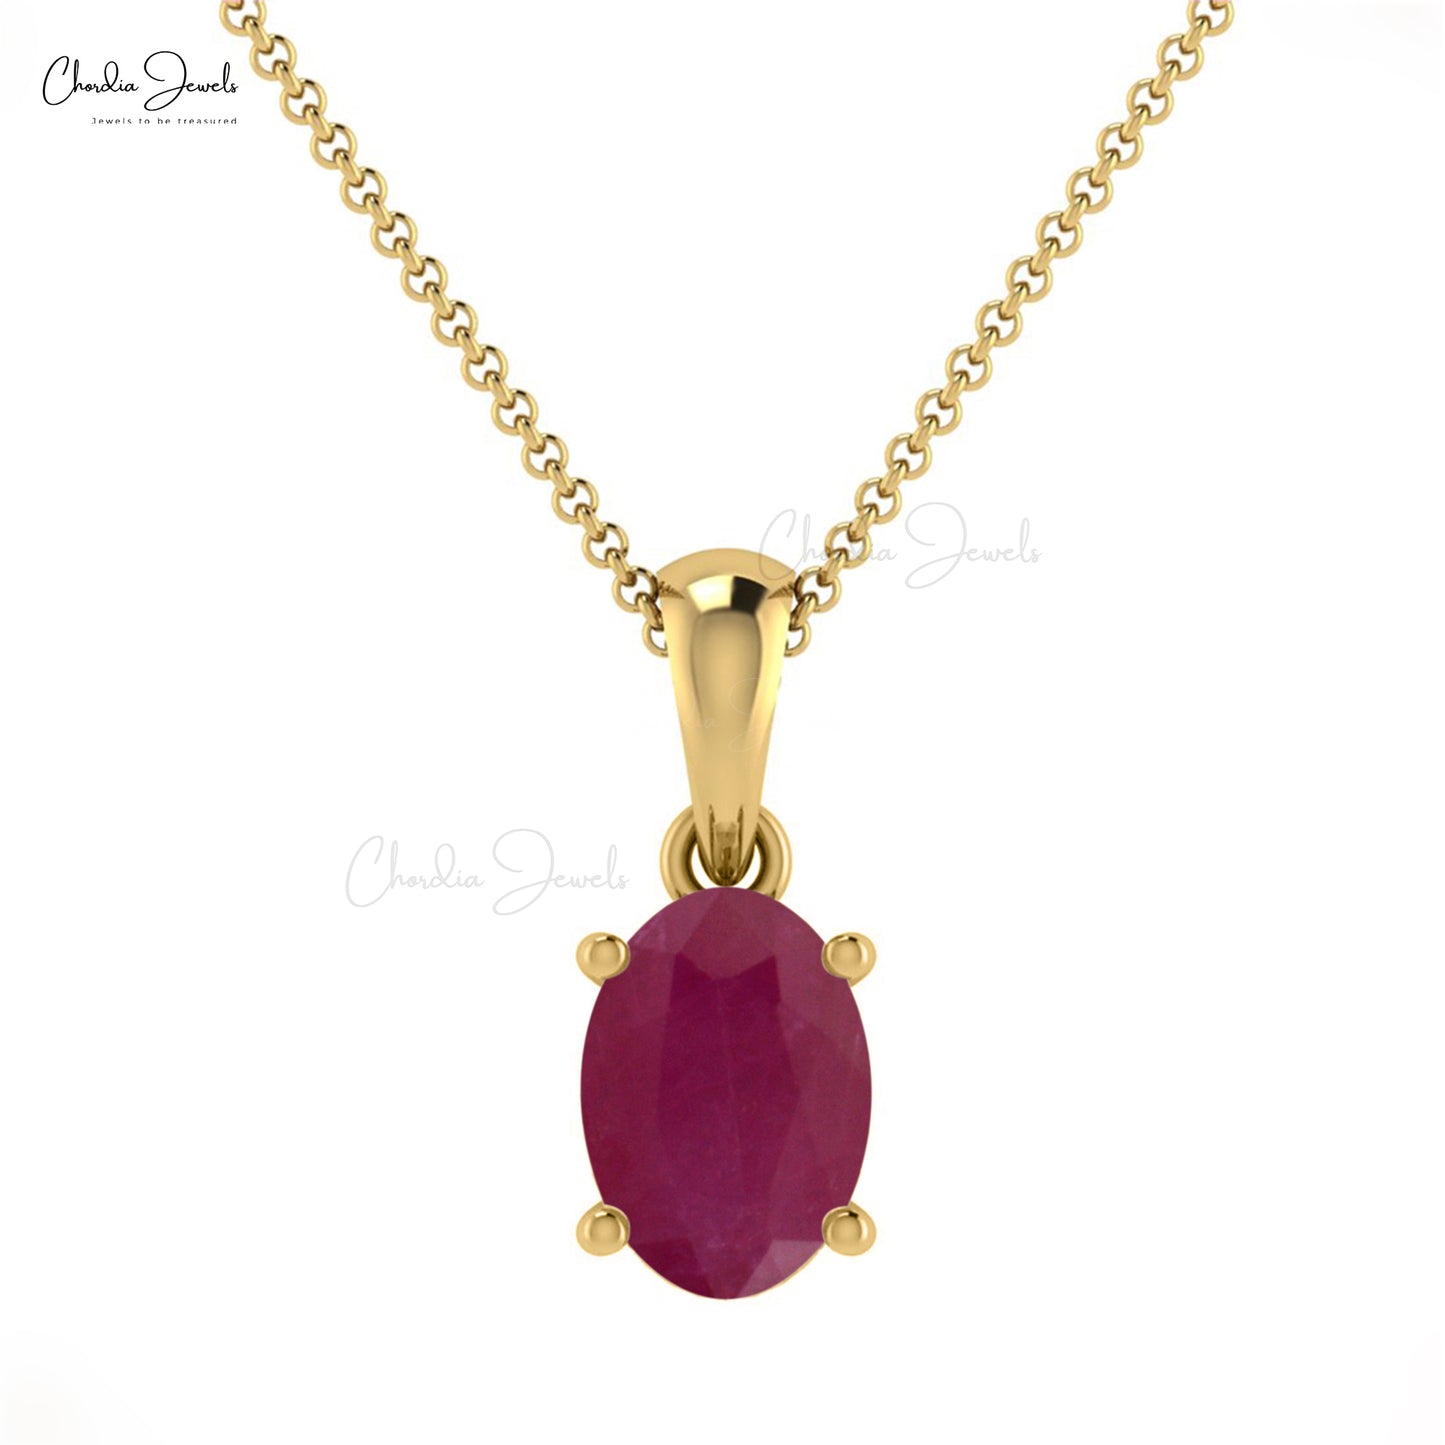 Load image into Gallery viewer, Natural Ruby Gemstone Pendant 0.41Ct Oval Cut Solitaire Pendant In 14k Solid Gold Jewelry
